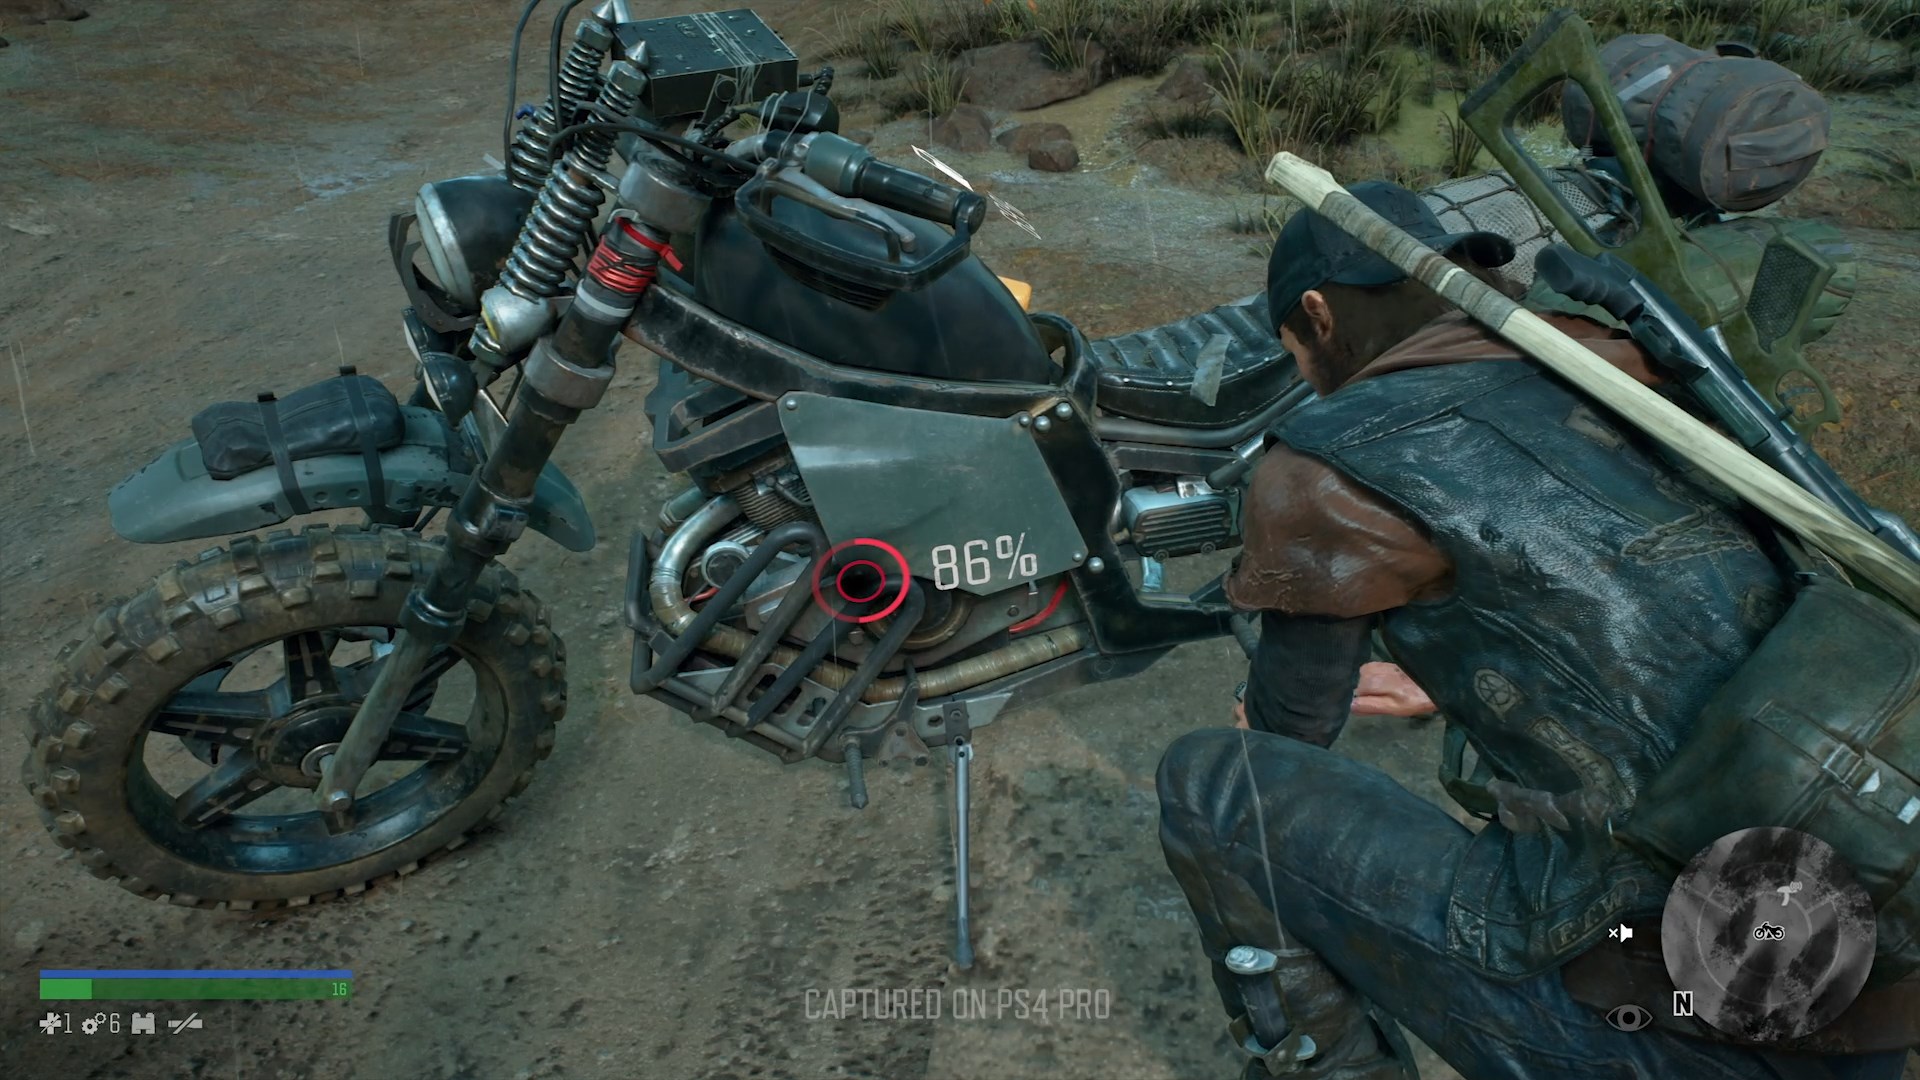 Days Gone New Trailer Shows Off More of Deacon's Bike; Customization,  Upgrades and More Will be Featured - Gameranx